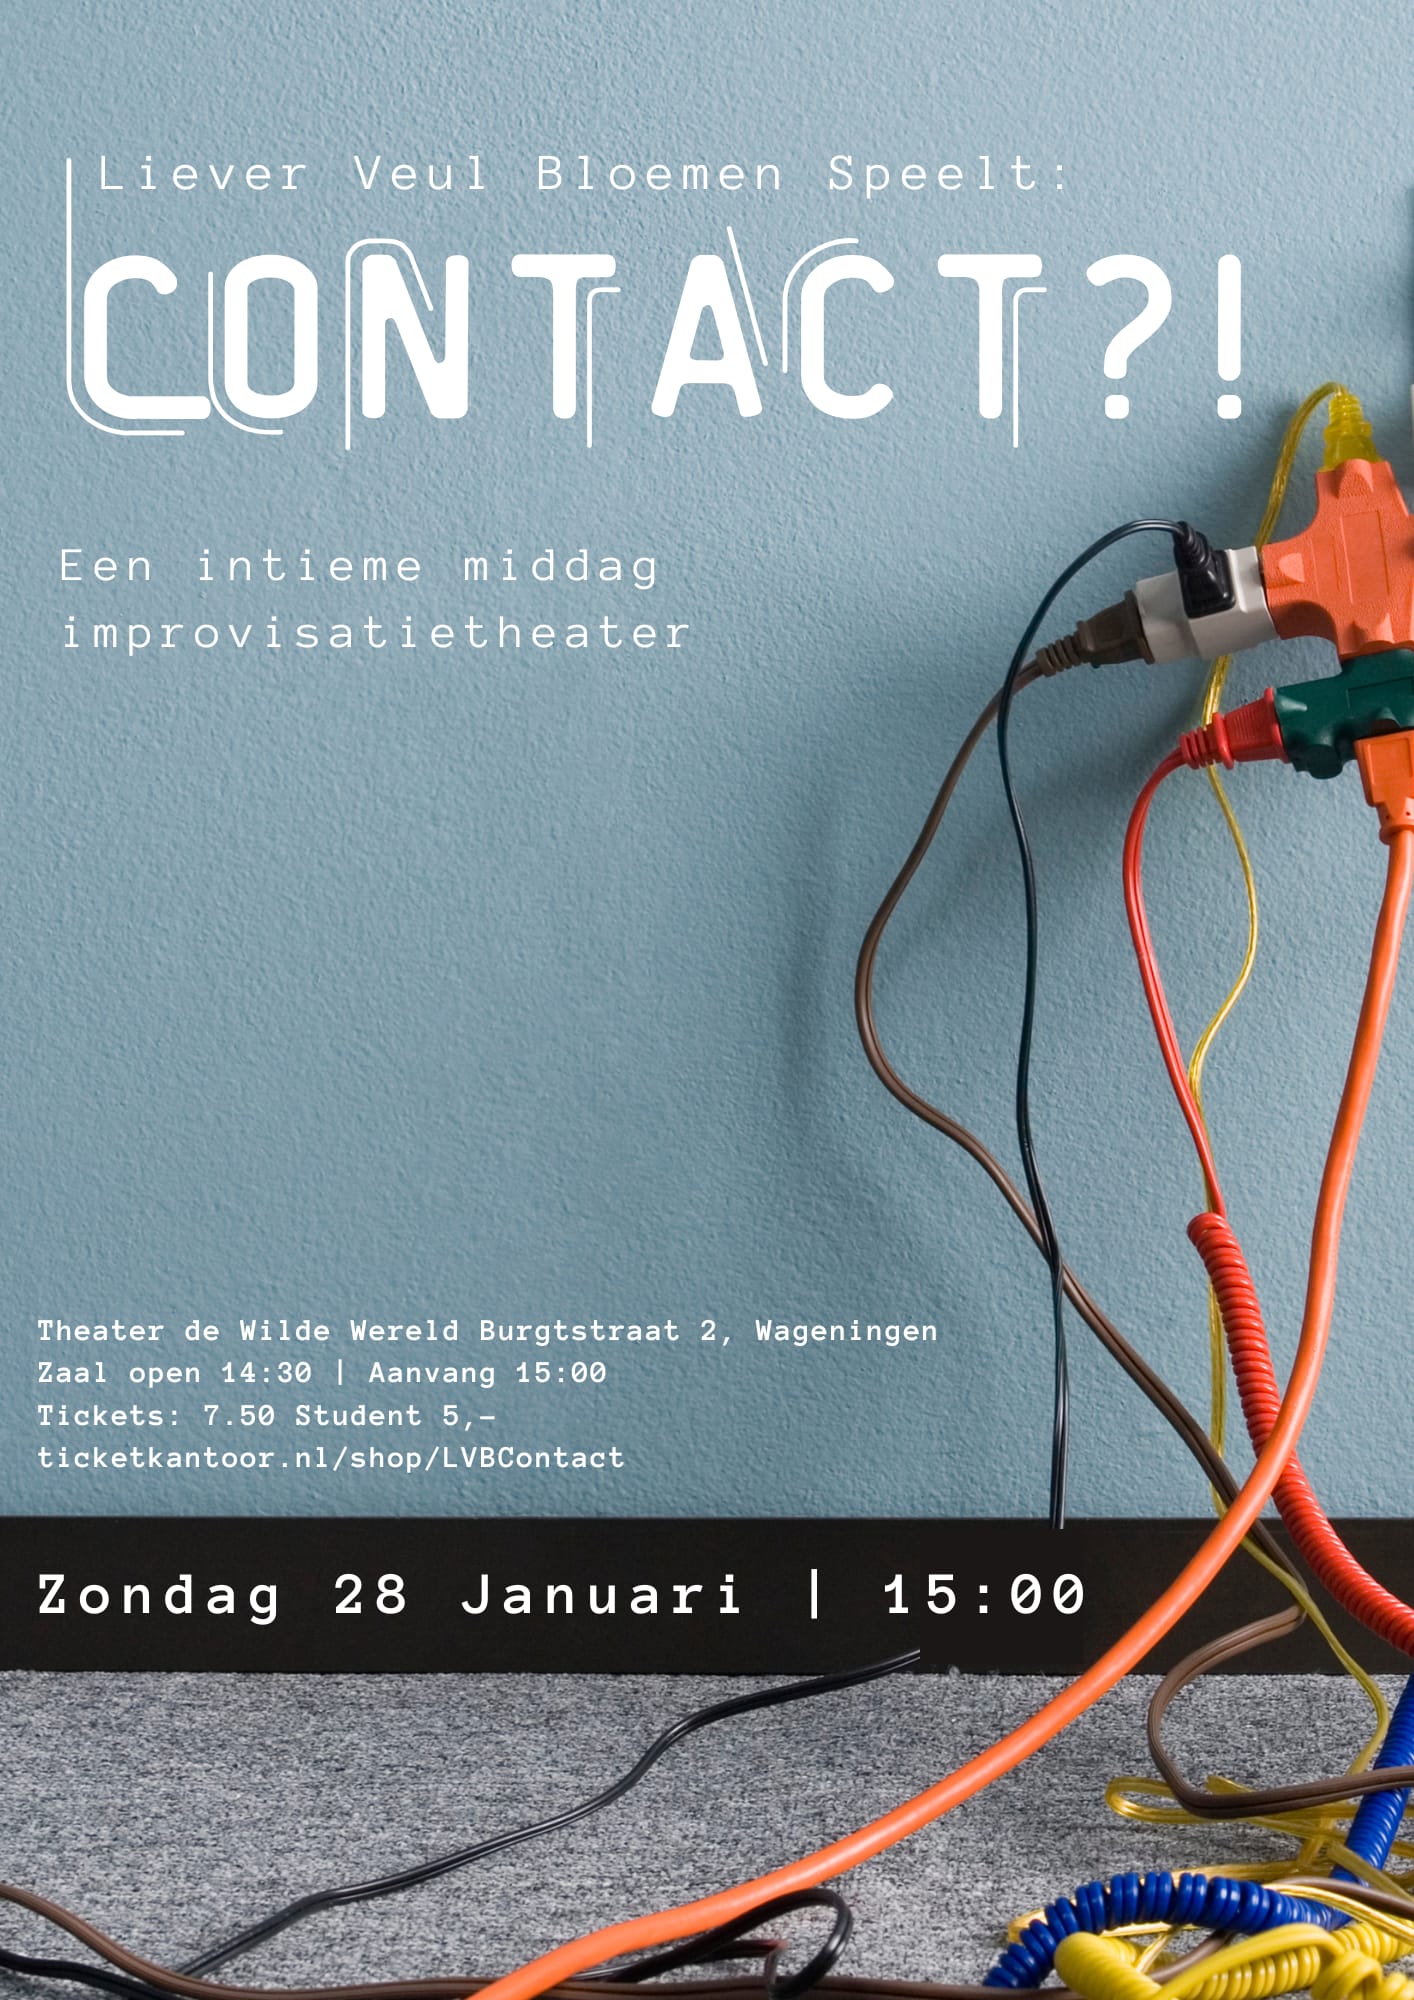 Theatervoorstelling ‘Contact?!’